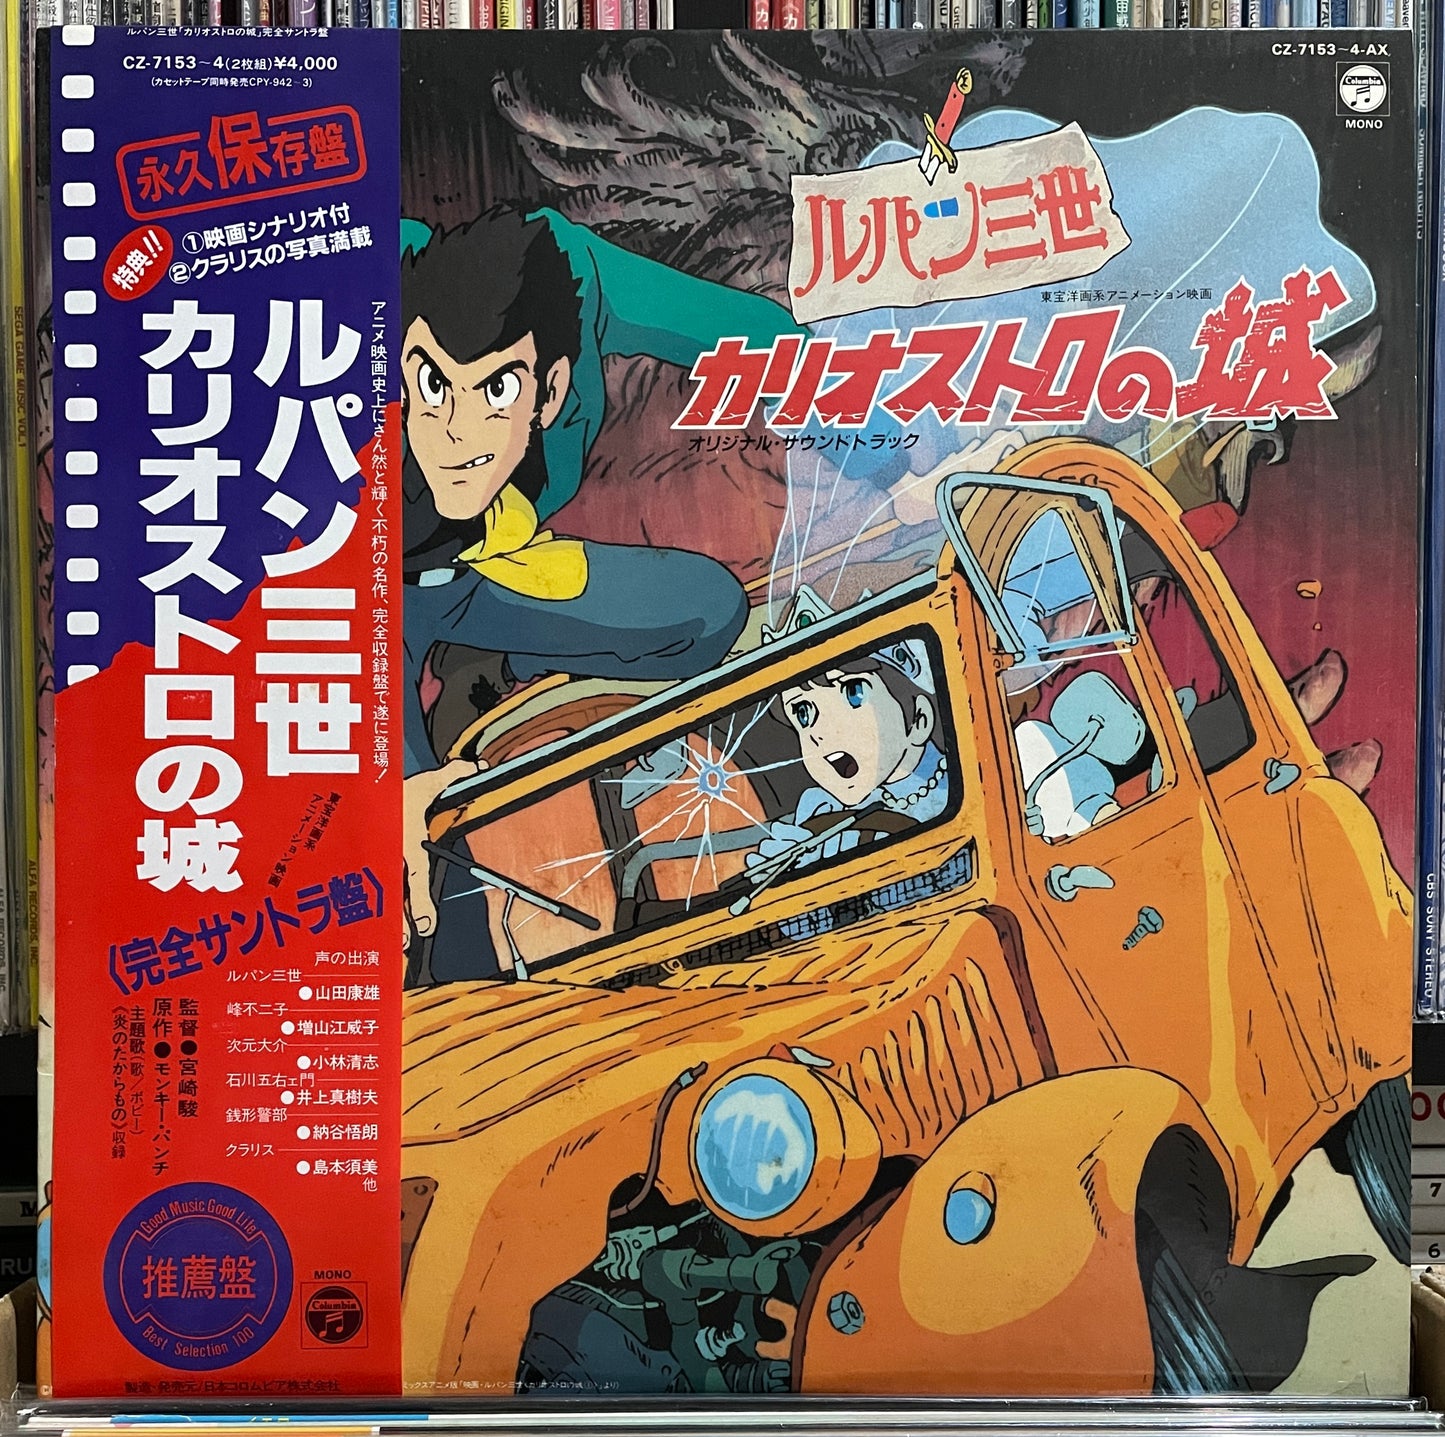 Yuji Ohno (You & The Explosion Band) “Lupin The 3rd - Castle Of Cagliostro” OST (1981)